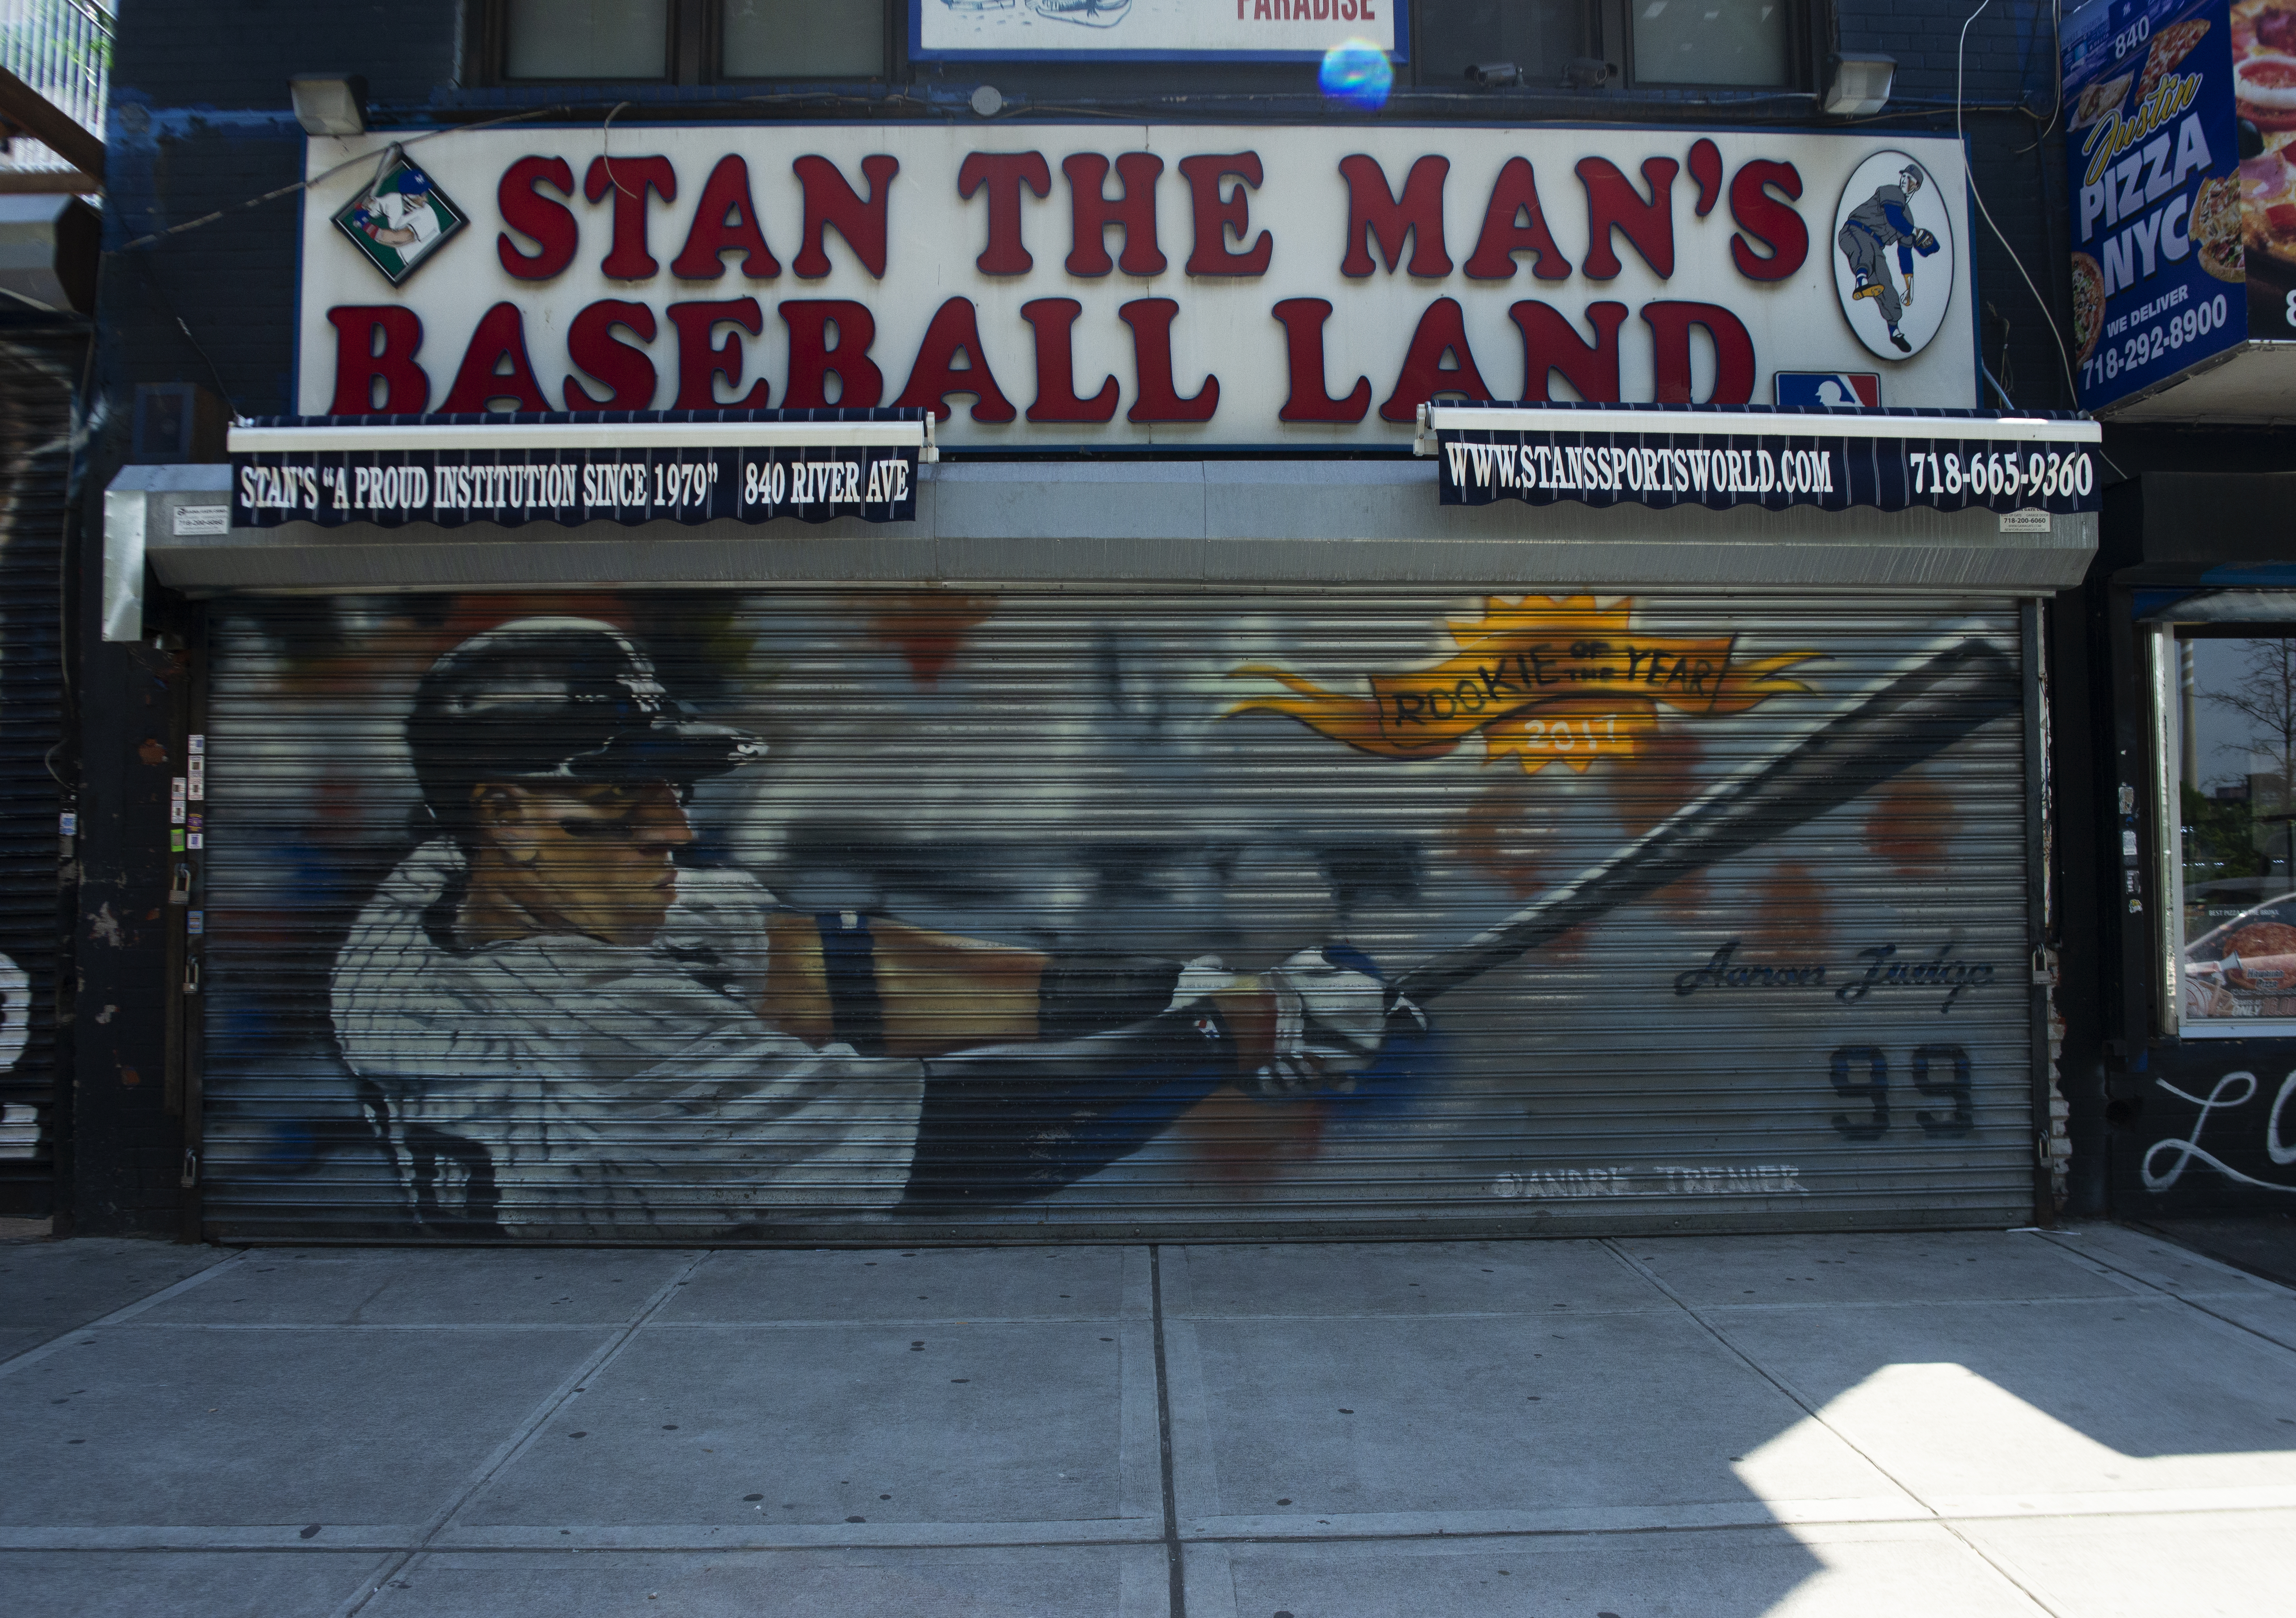 Family owned business across from Yankee Stadium on rebound